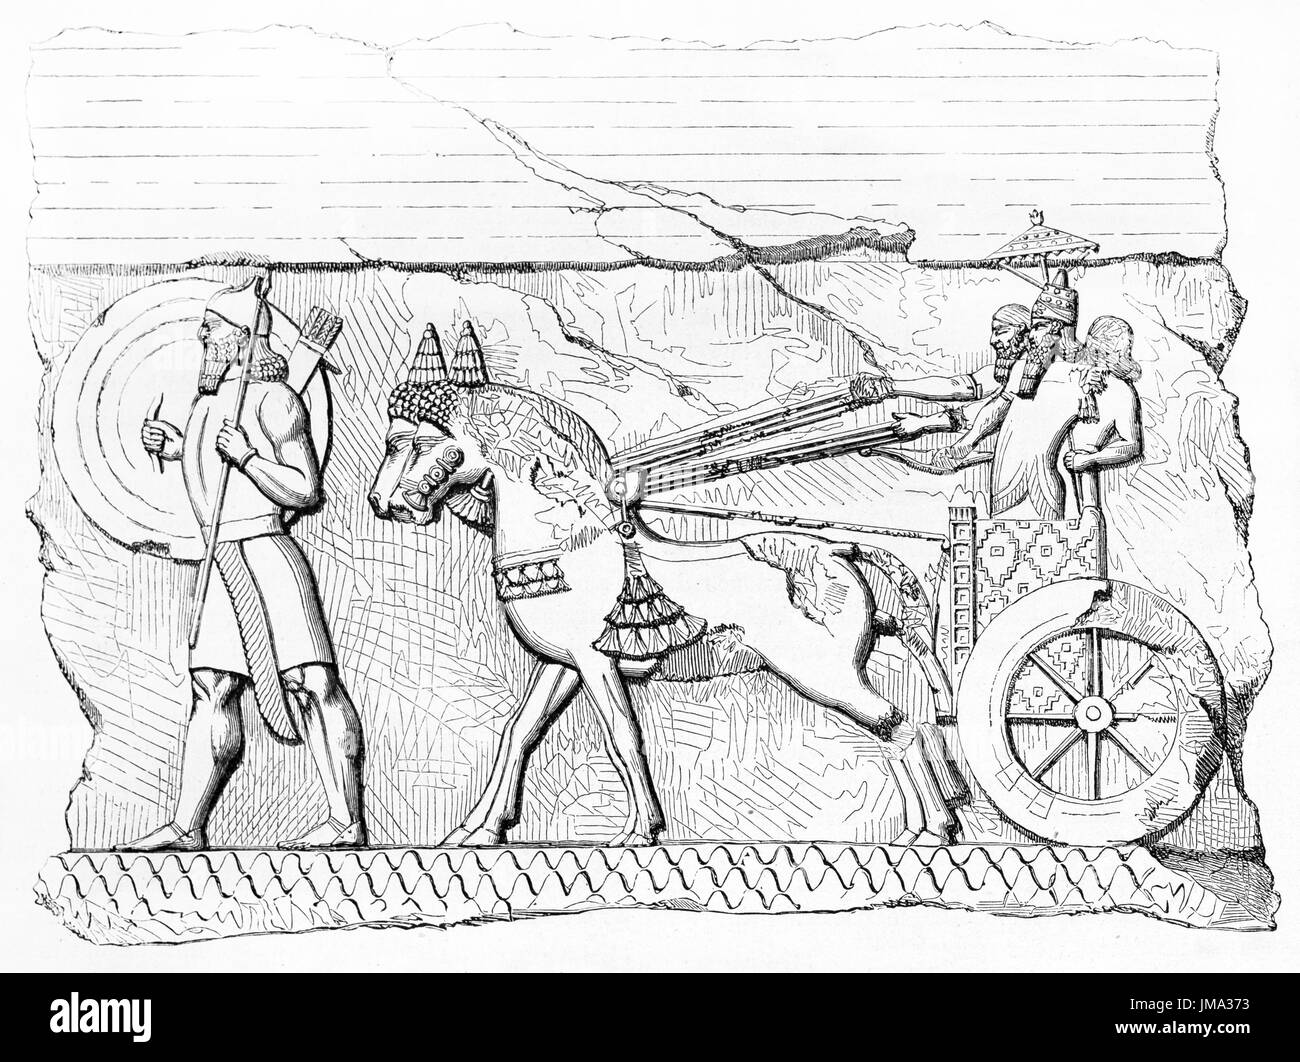 Old illustration of Khorsabad bas relief  (Antique Assyrian capital, North Iraq). Created by Flandin, published on Le Tour du Monde, Paris, 1861. Stock Photo